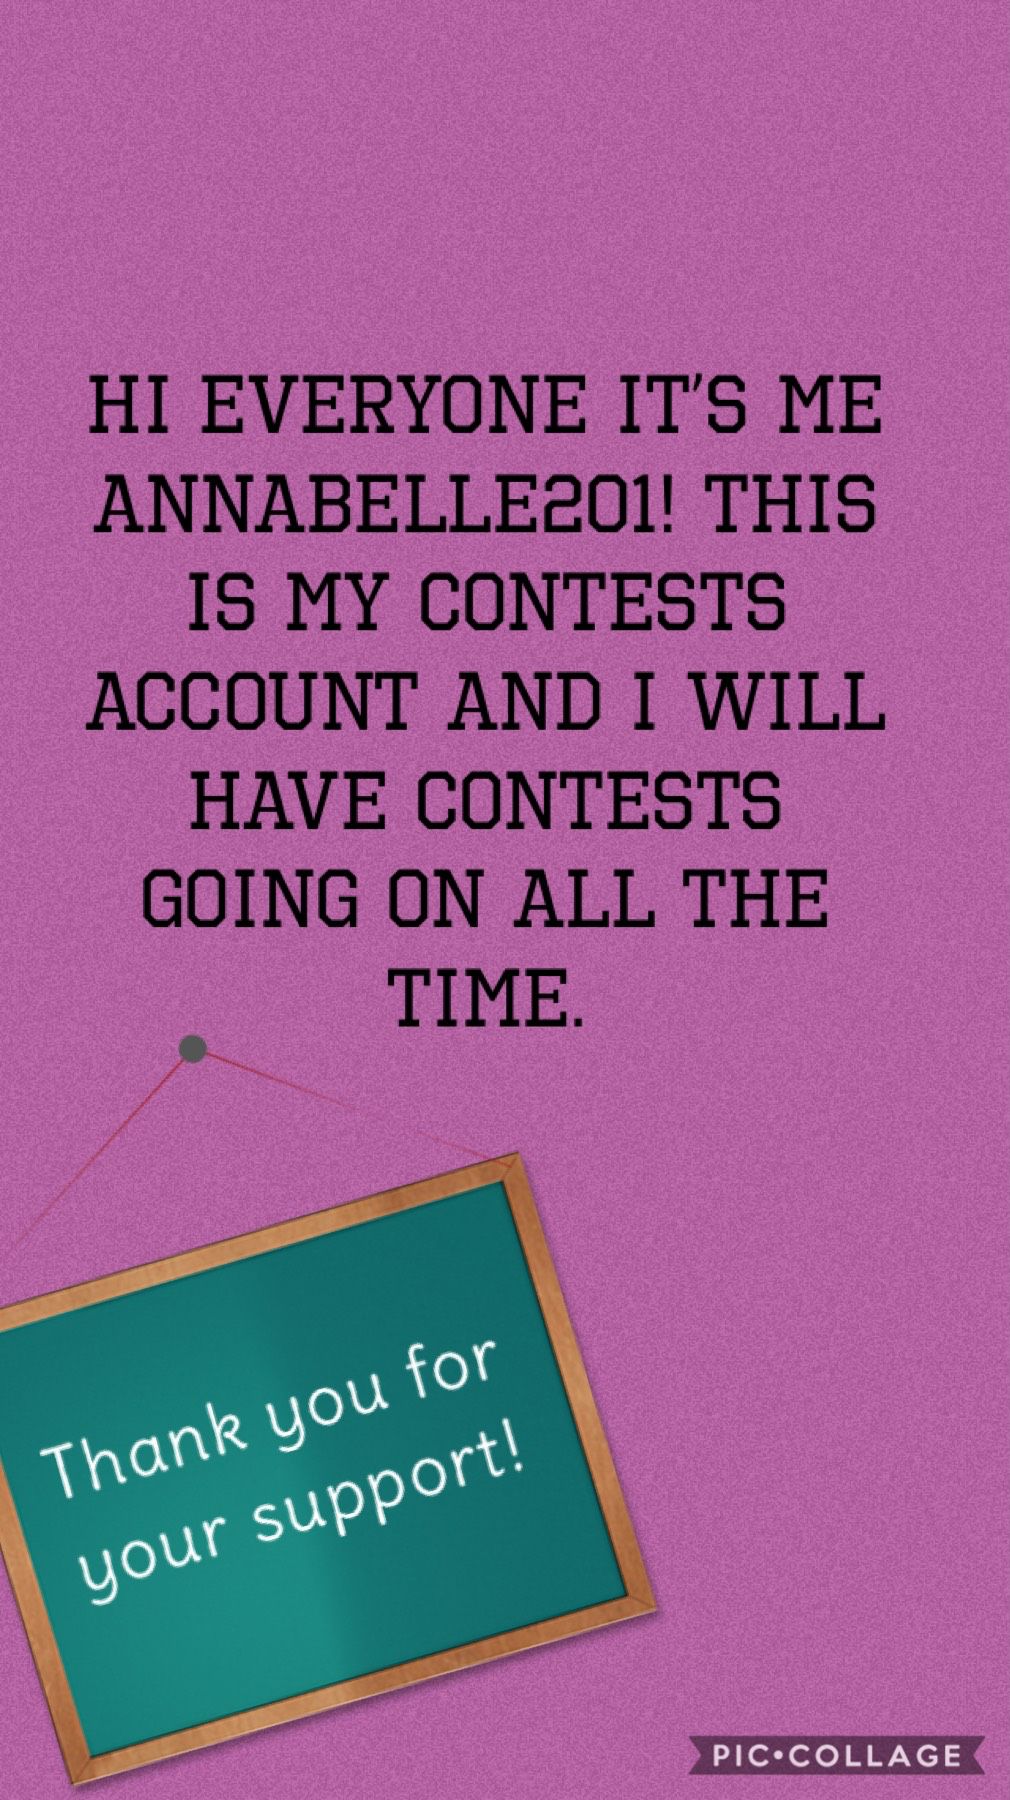 Collage by Annabelle201Contests